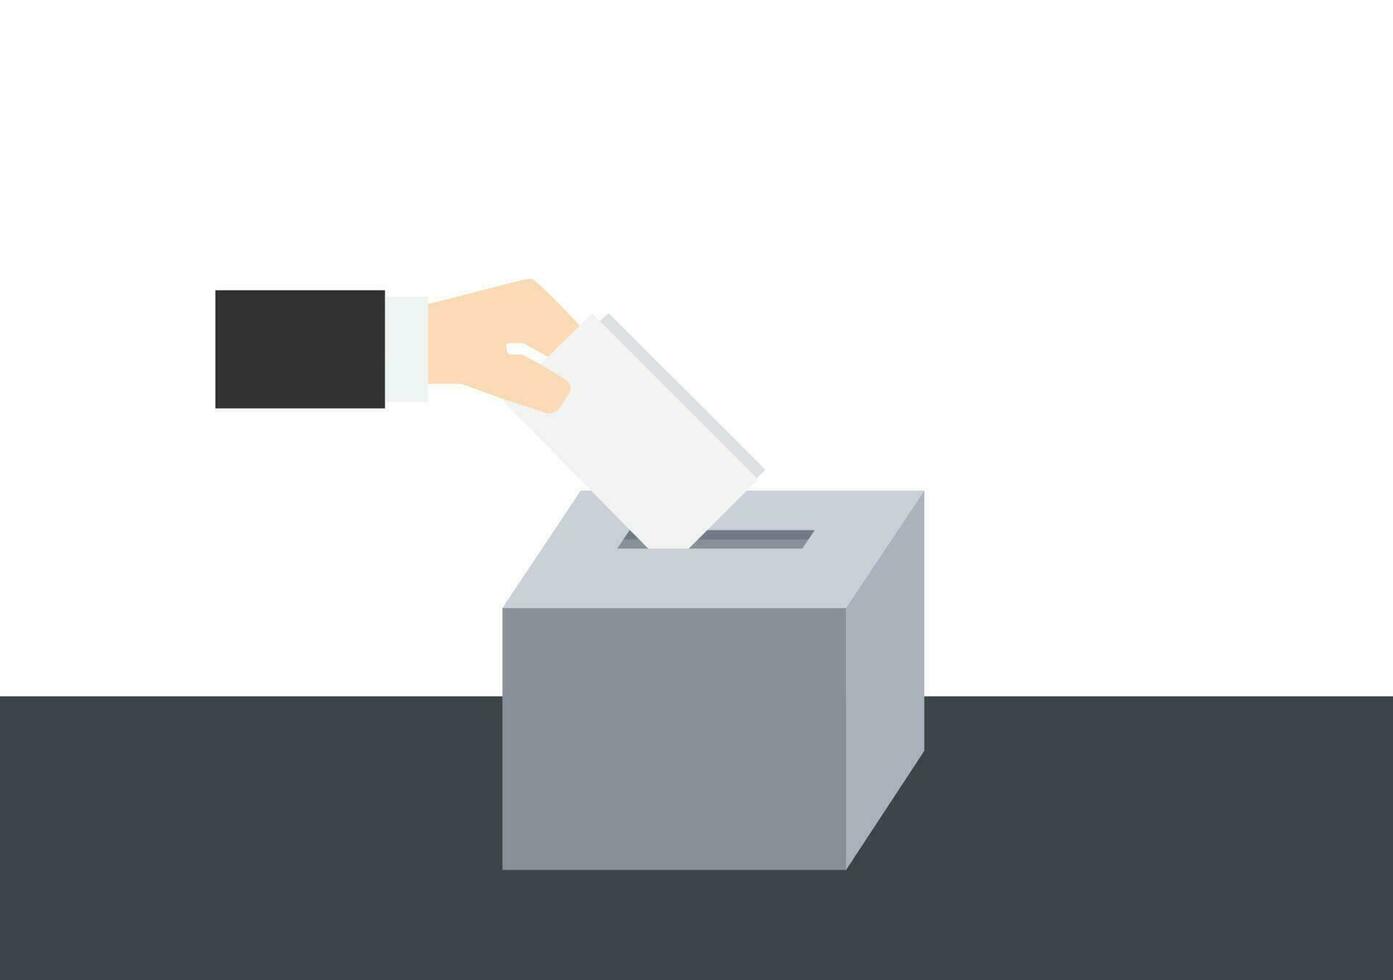 a man voter drop card in ballot box on plain background vector